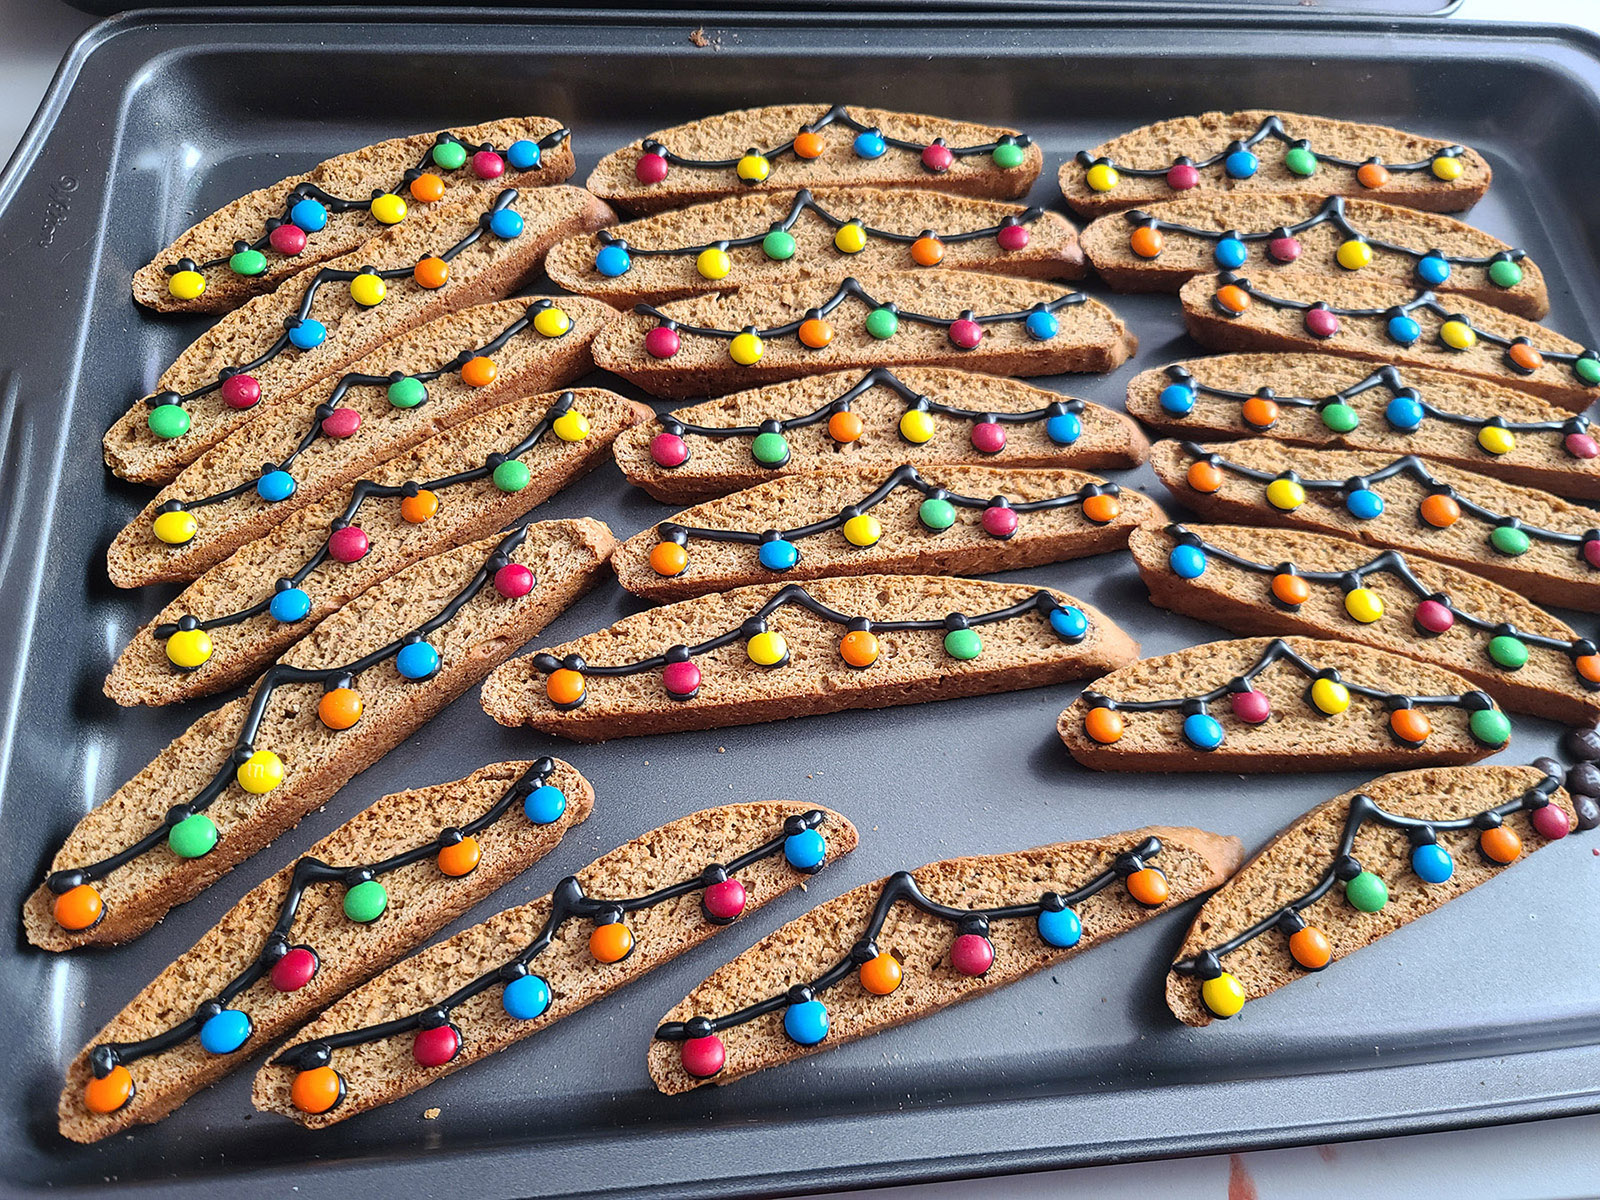 A pan of gingerbread biscotti decorated to look like it’s strung with Christmas lights.